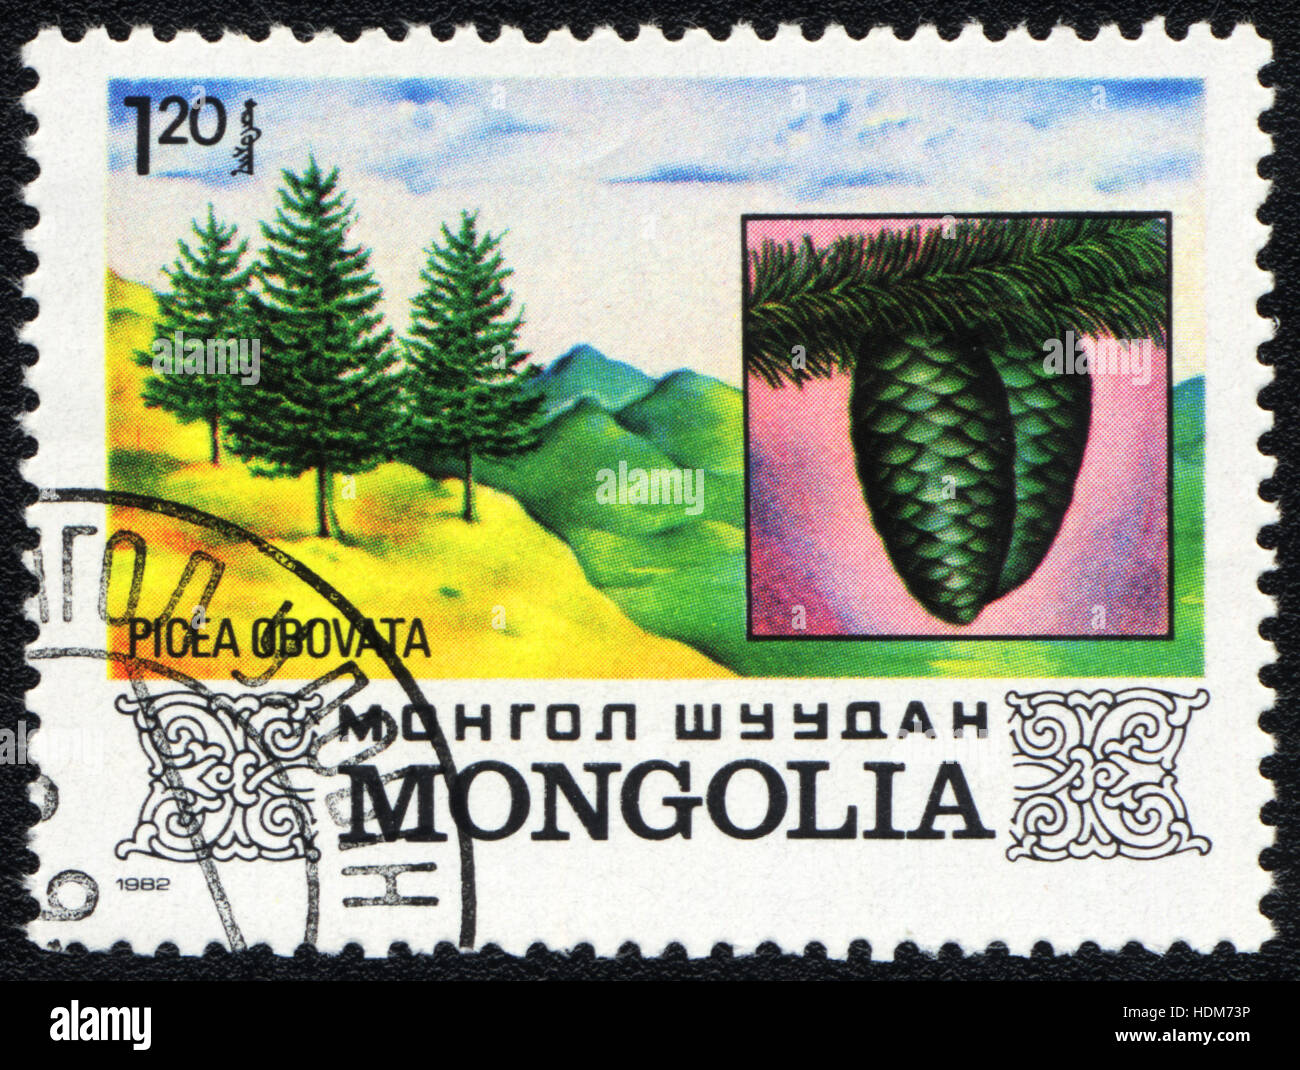 A postage stamp printed in MONGOLIA  shows a  Picea obovata,  1982 Stock Photo